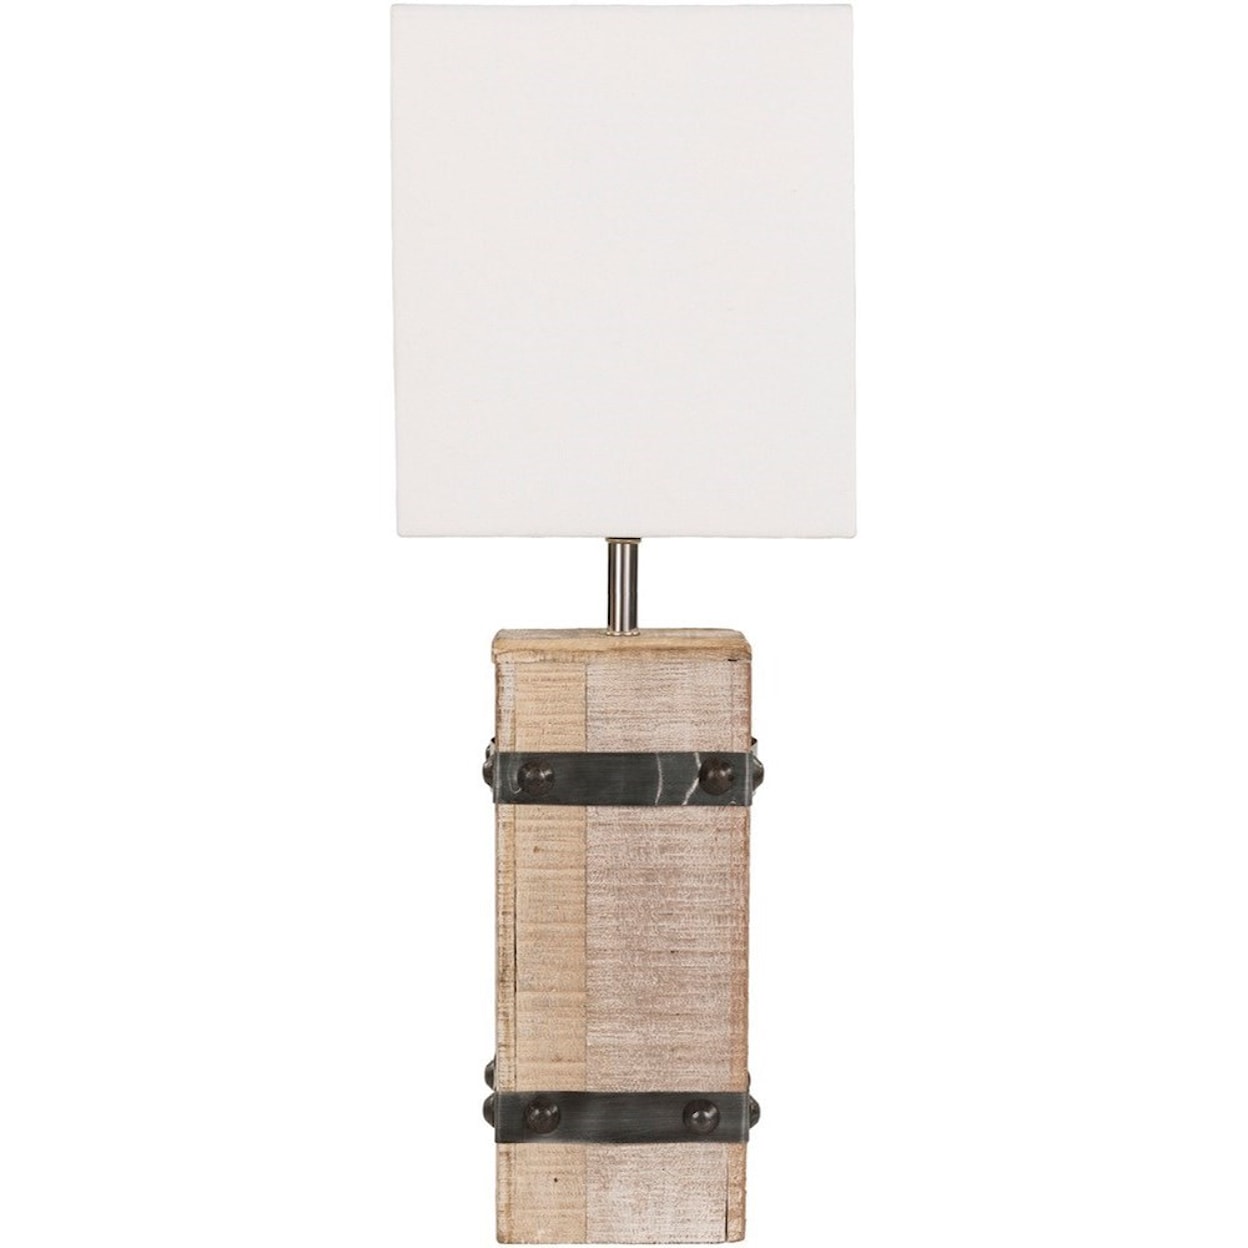 Surya Duluth White Washed Rustic Table Lamp